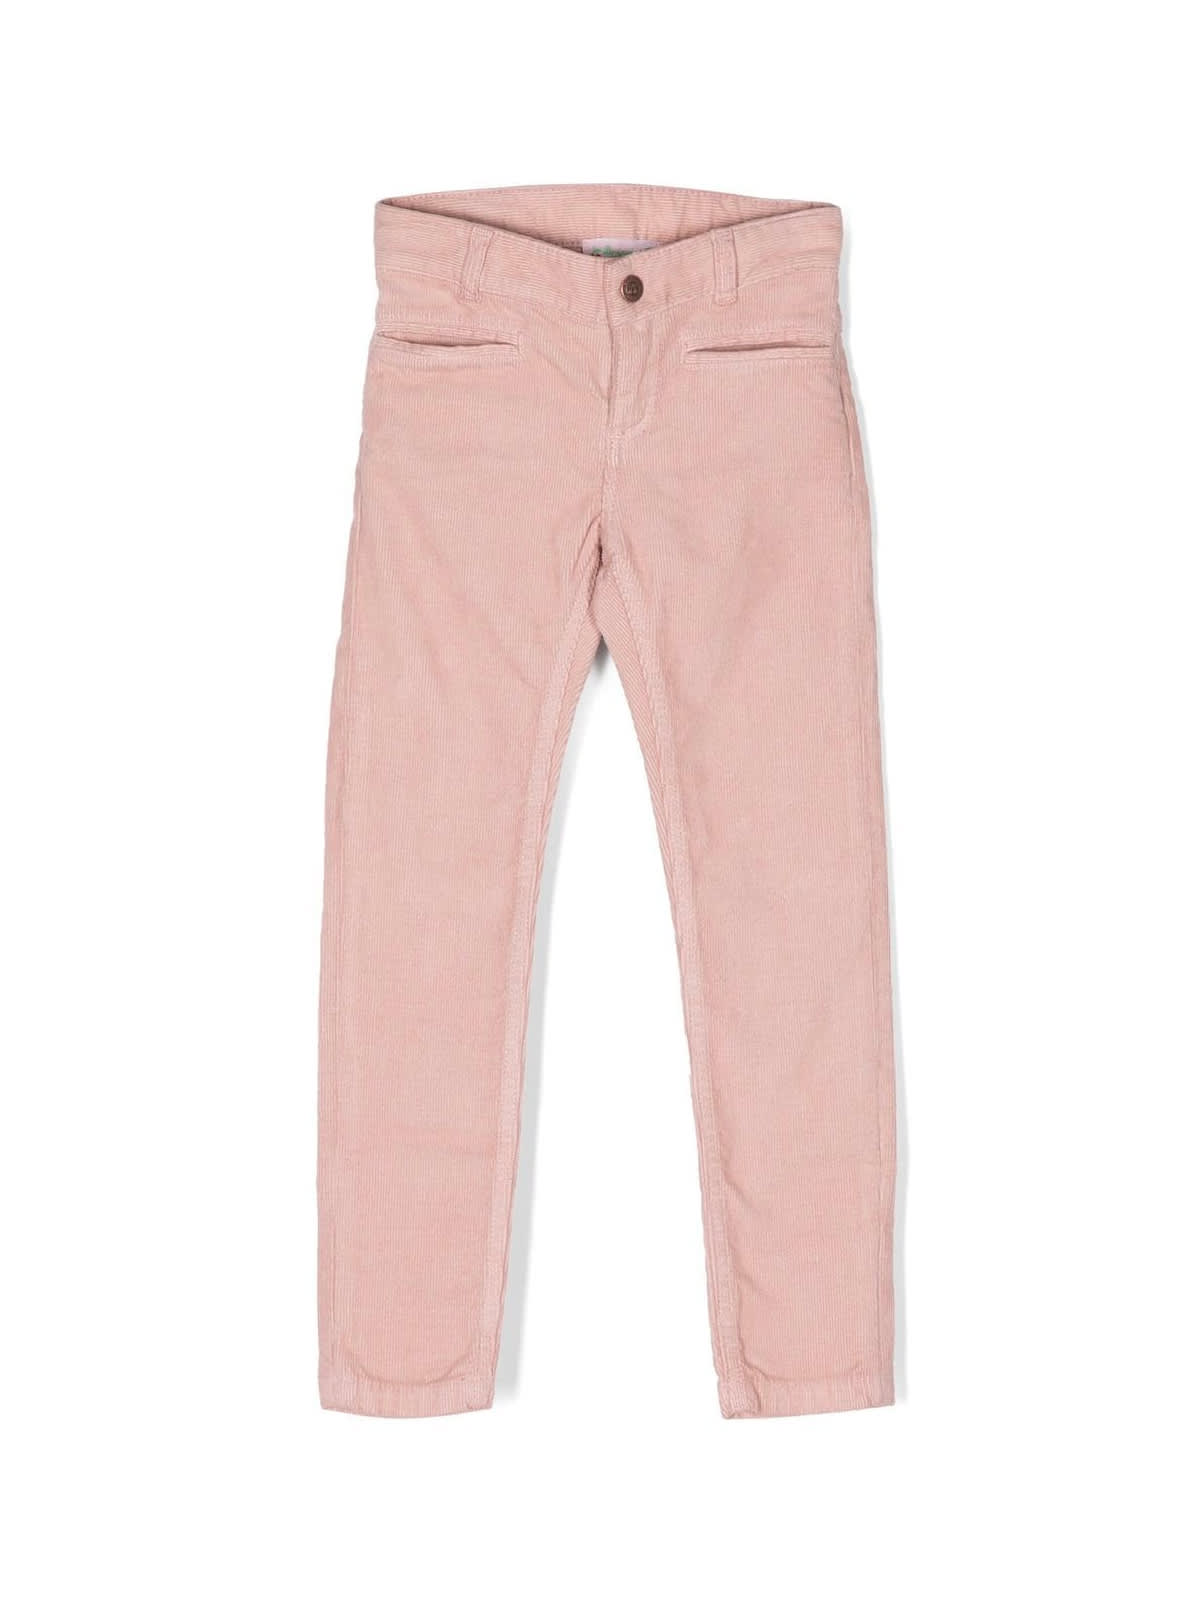 Bonpoint Brook Trousers